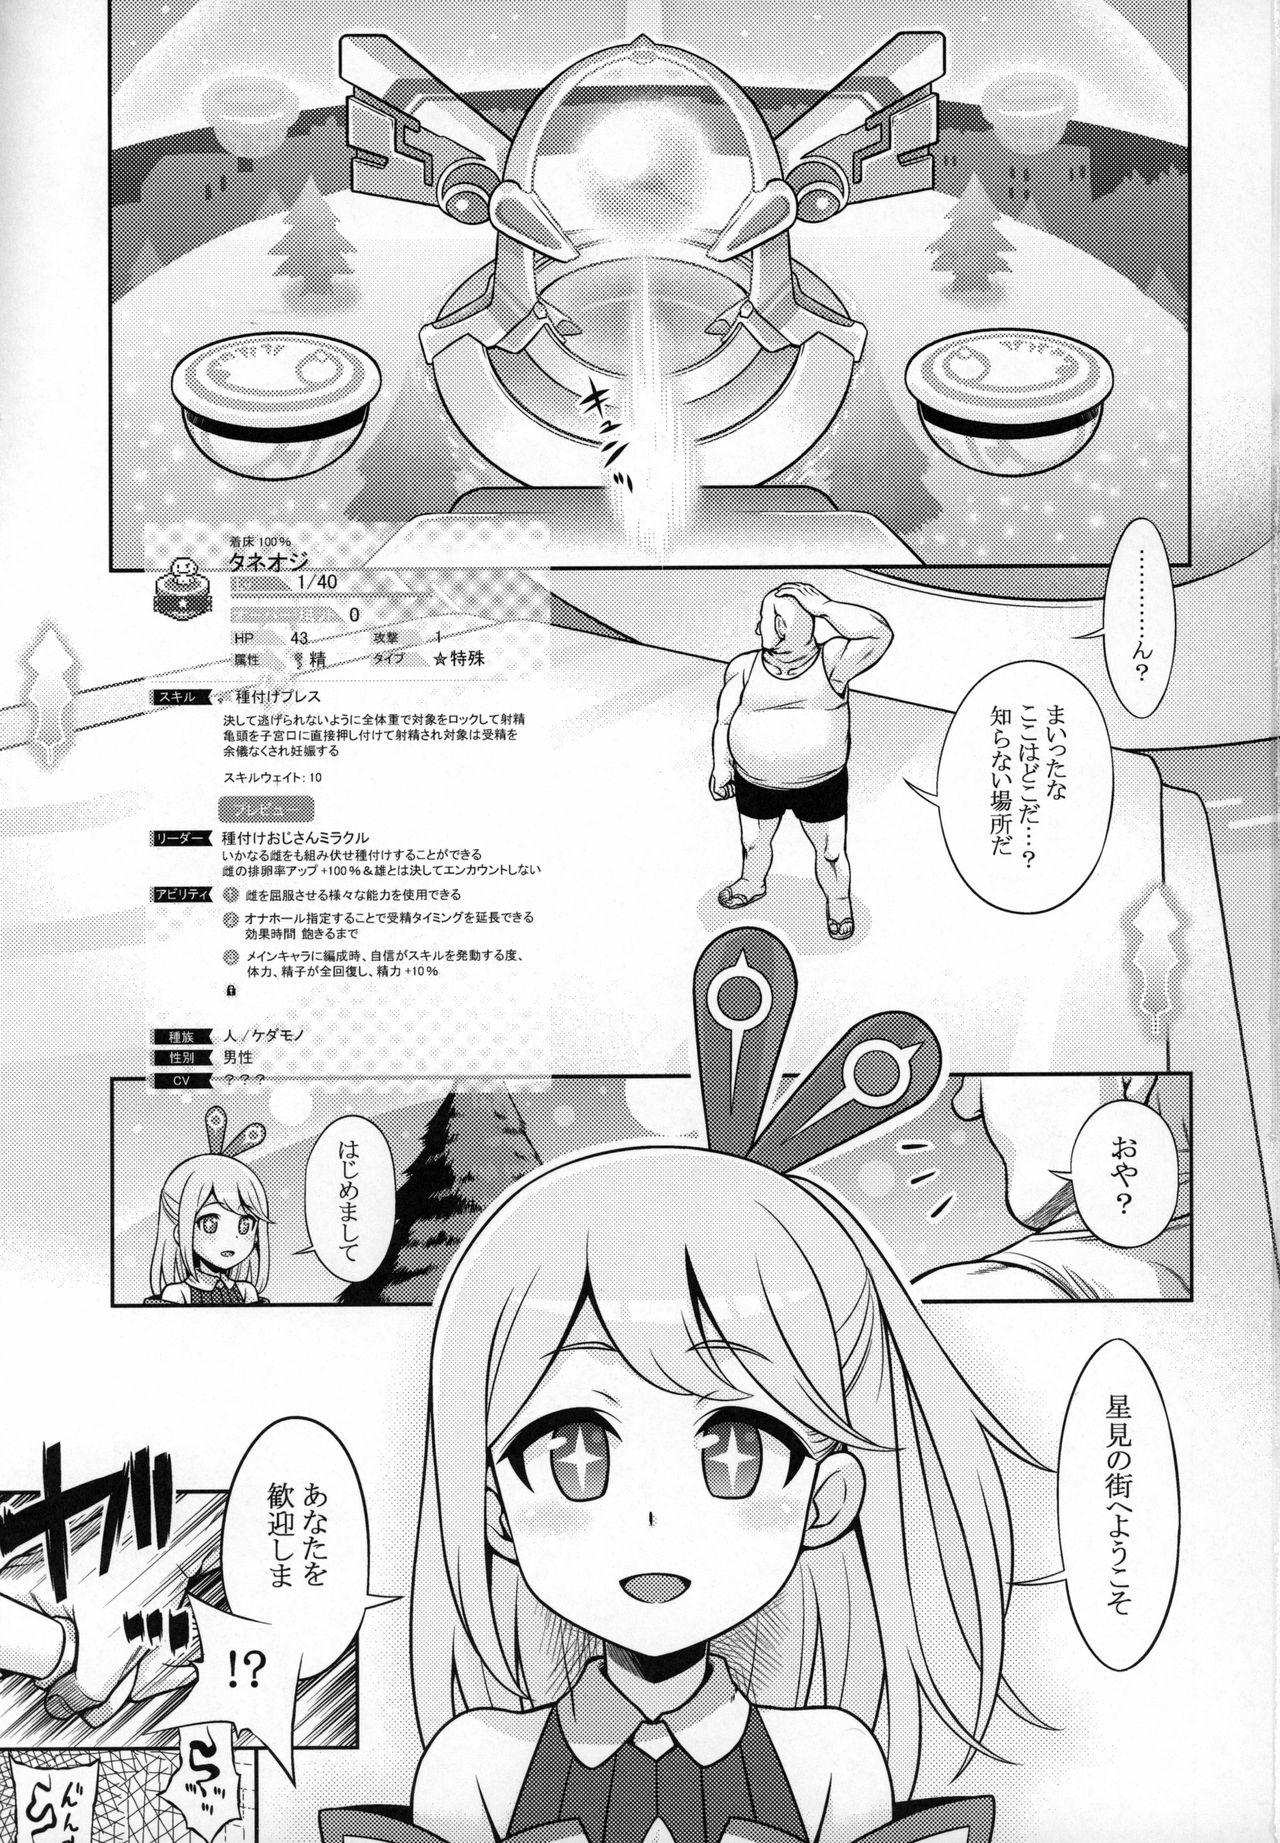 Groping WorFli no Anone - World flipper Les - Page 2